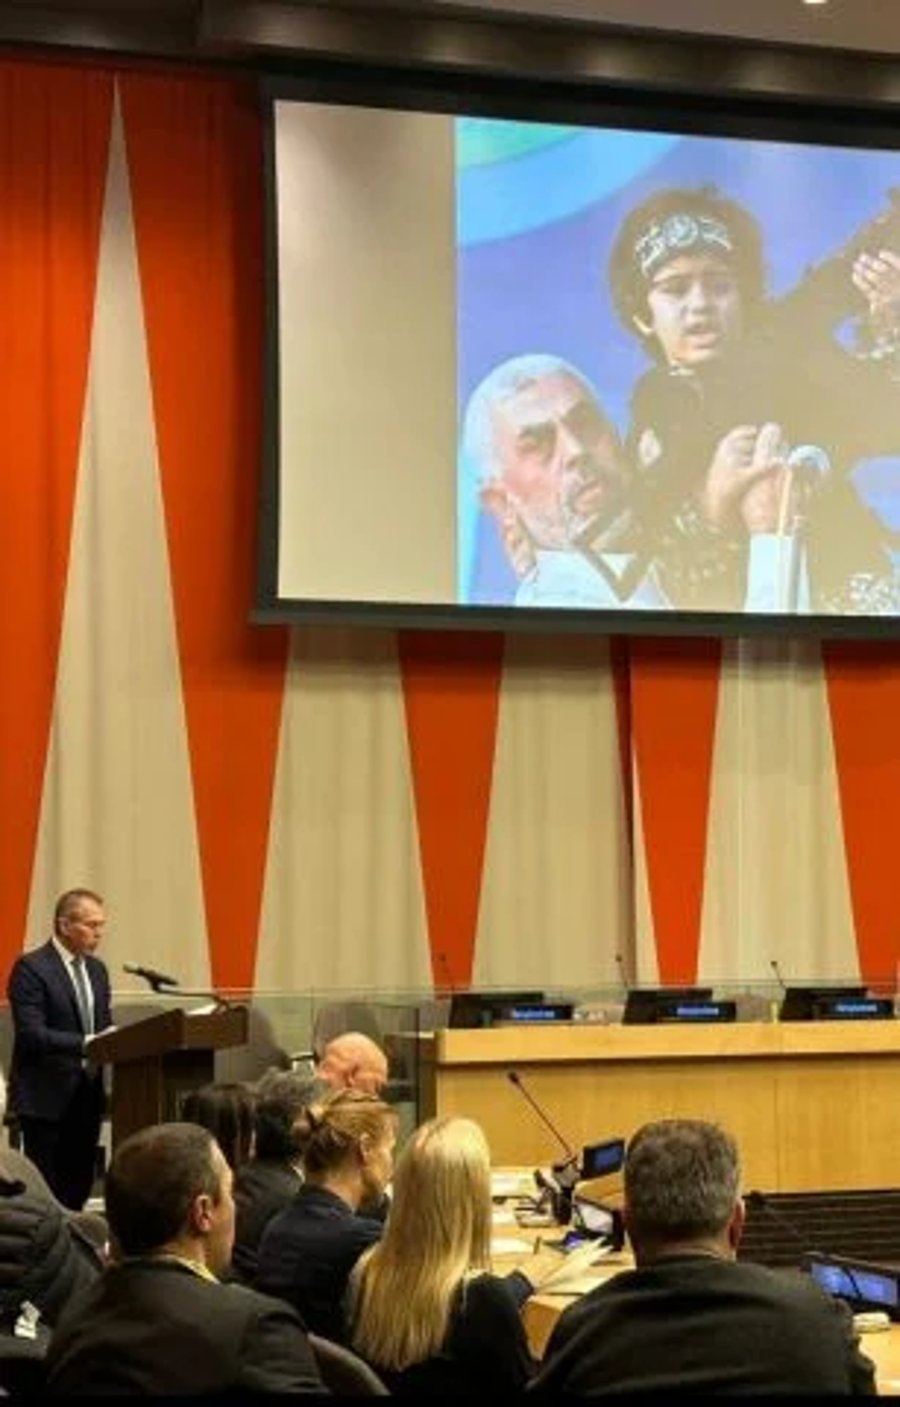 The screening at the UN